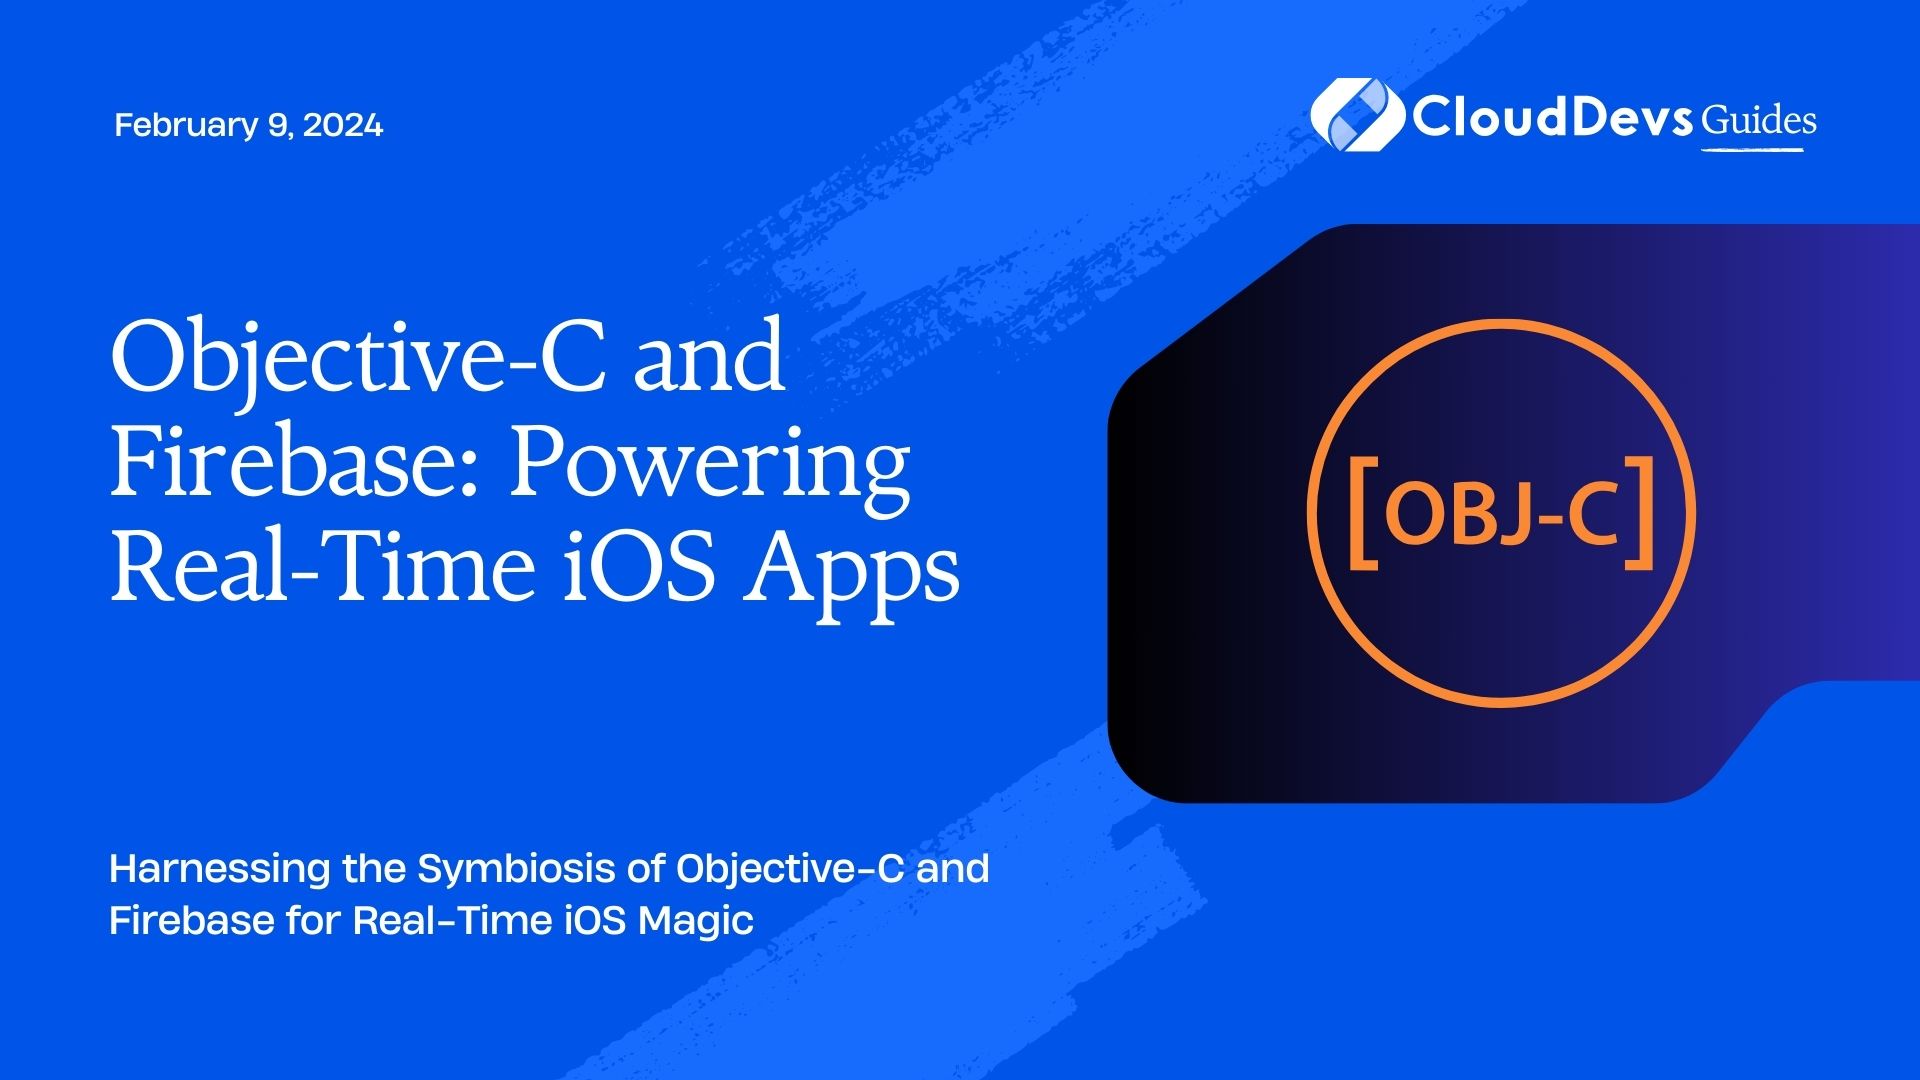 Objective-C and Firebase: Powering Real-Time iOS Apps